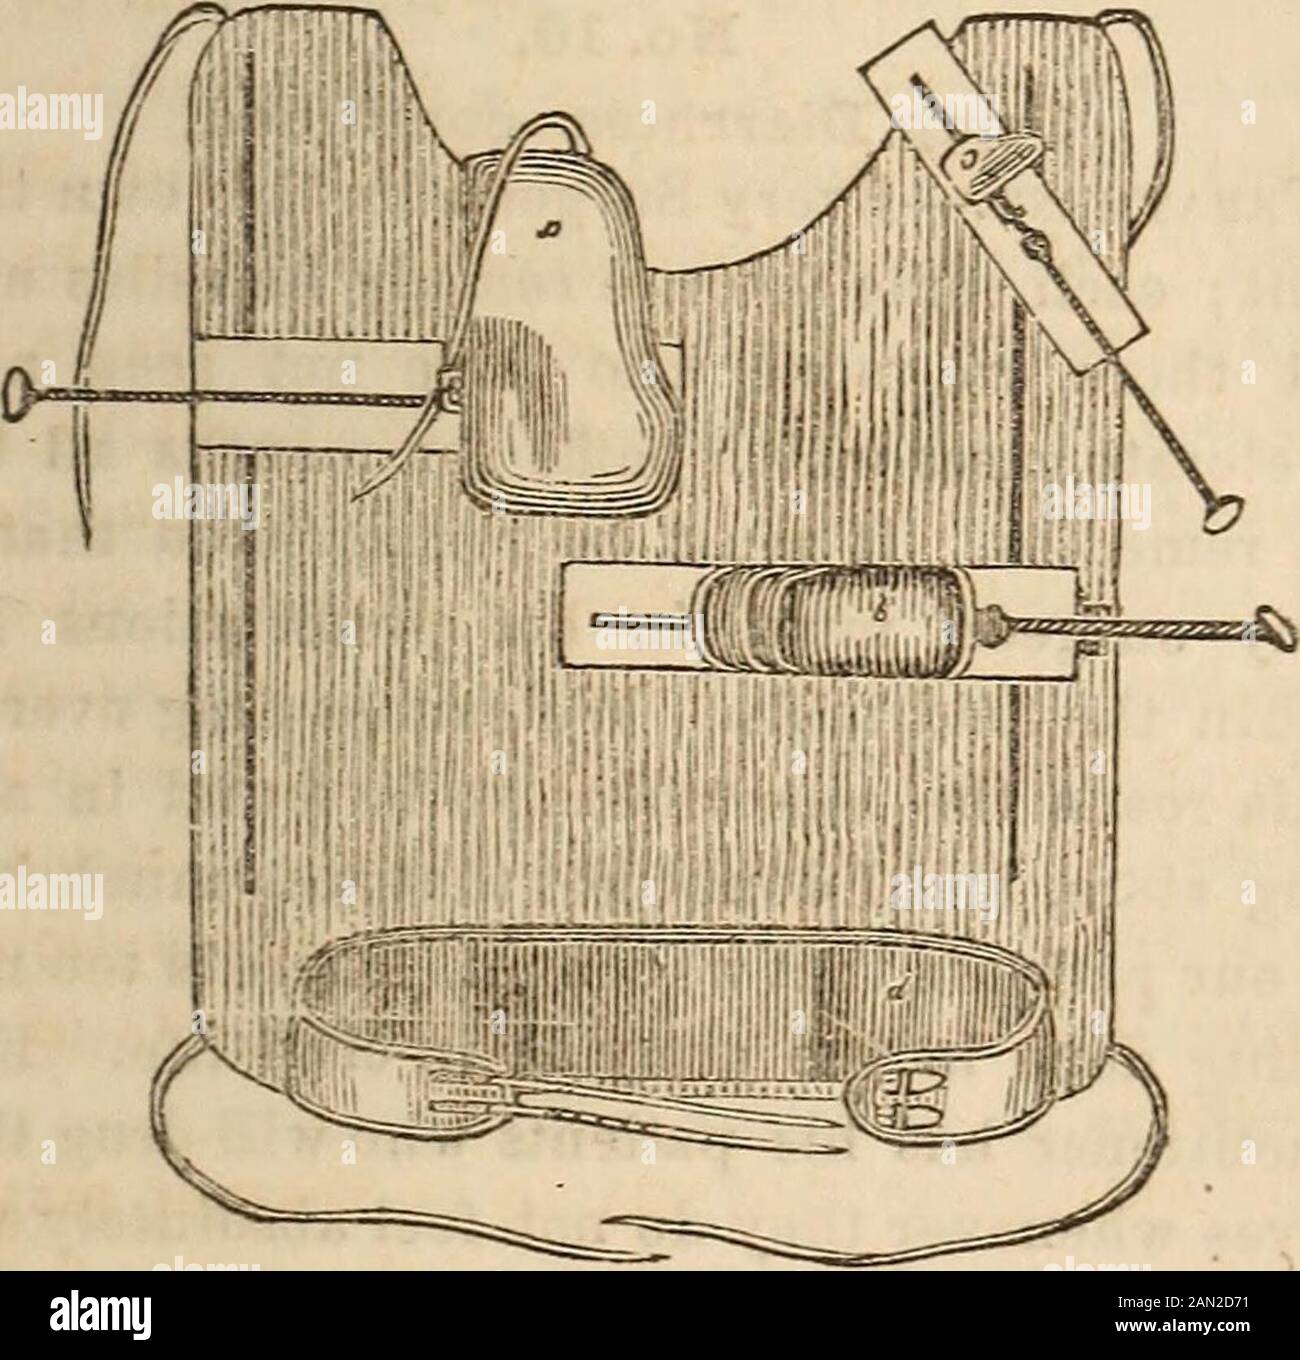 The Medical and surgical reporter . ults were of 1863.] LECTURES. 67 course ascribed to the difficulties of its mechanicalarrangements and not to the inverted principle.Thus changes in the construction and improve-ments were carried on until Guerin* and Majorput a stop to them by demonstrating that longitu-dinal extension was a failure, unless accomplished bydirect action upon the curvatures. Since then me-chanical ingenuity has been thrown into a newchannel with a view of constructing apparatusacting by lateral pressure and counter-pressure.The contrivances of Guerin and Major are verycomplic Stock Photo